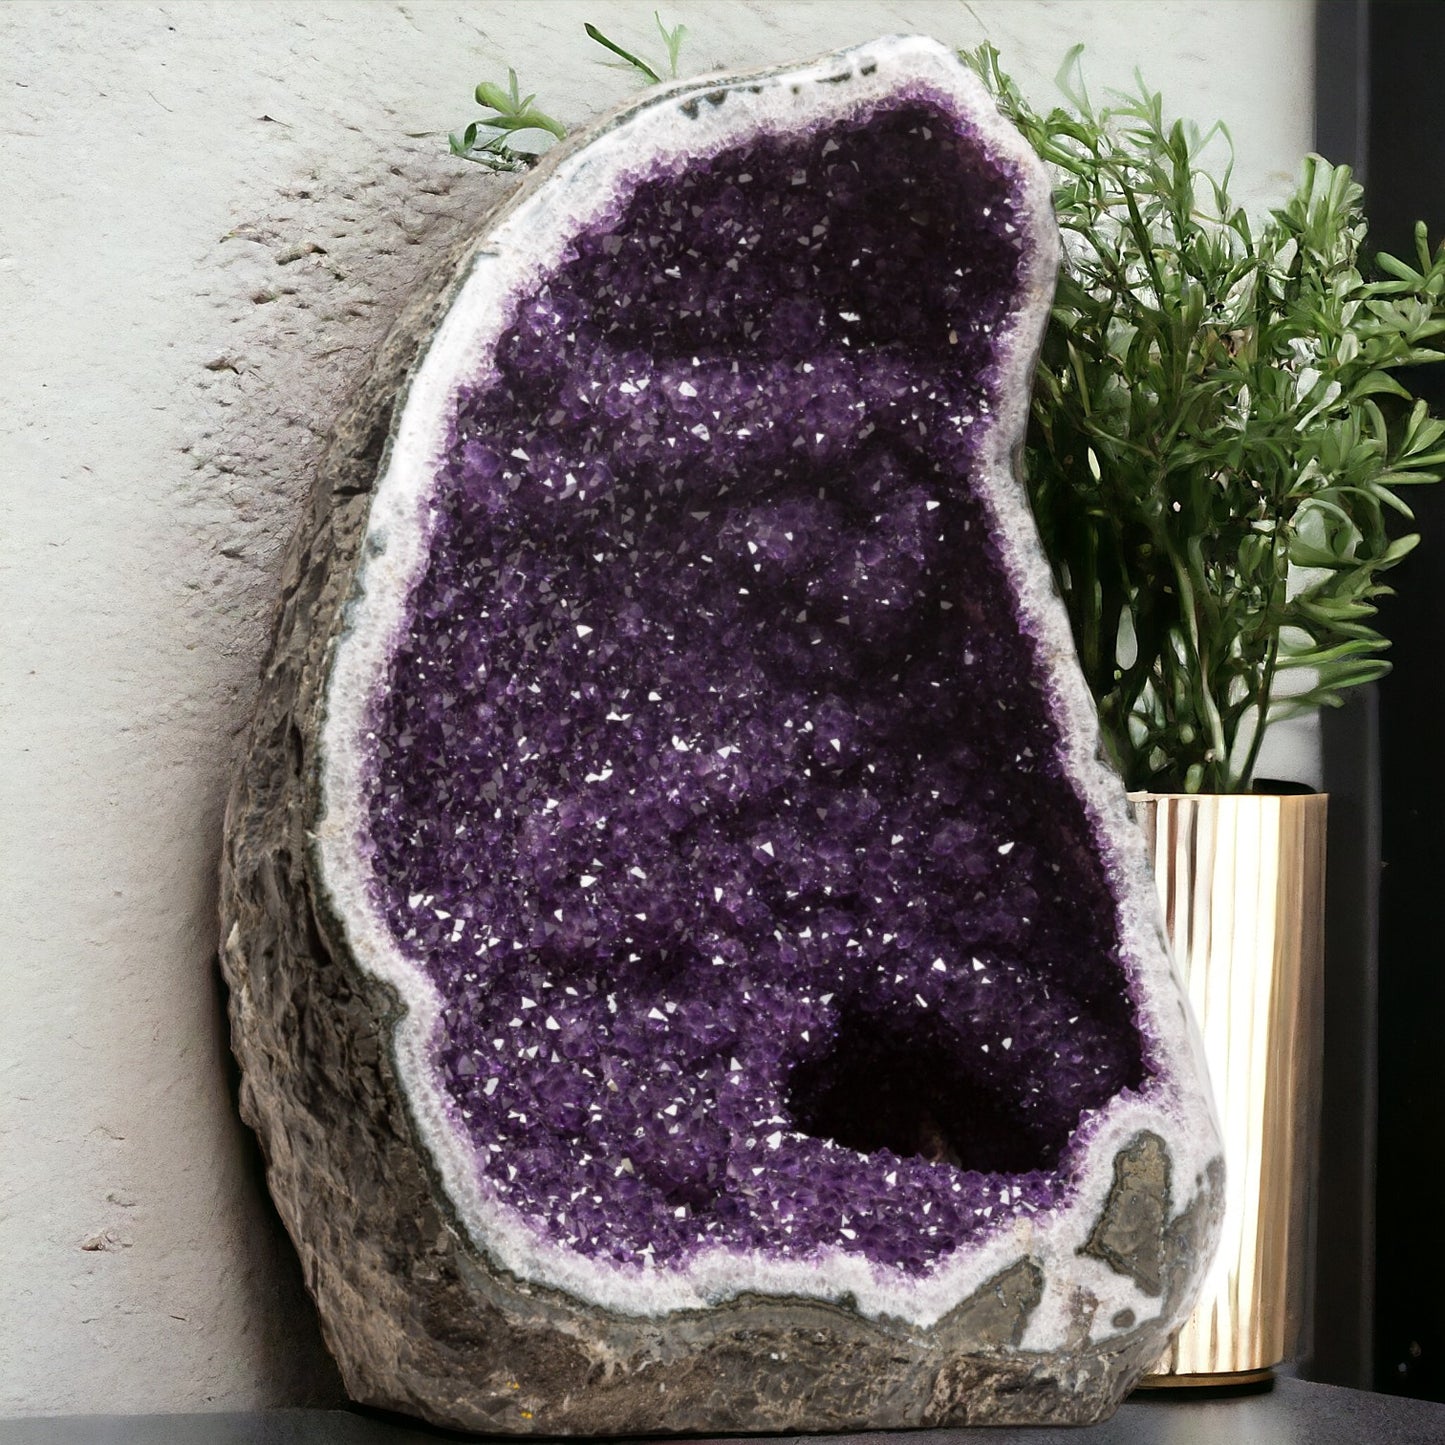 71.85 lbs Unique Collectors Quality Amethyst Geode - Large Natural Deep Purple Crystal Cluster Stone from Uruguay